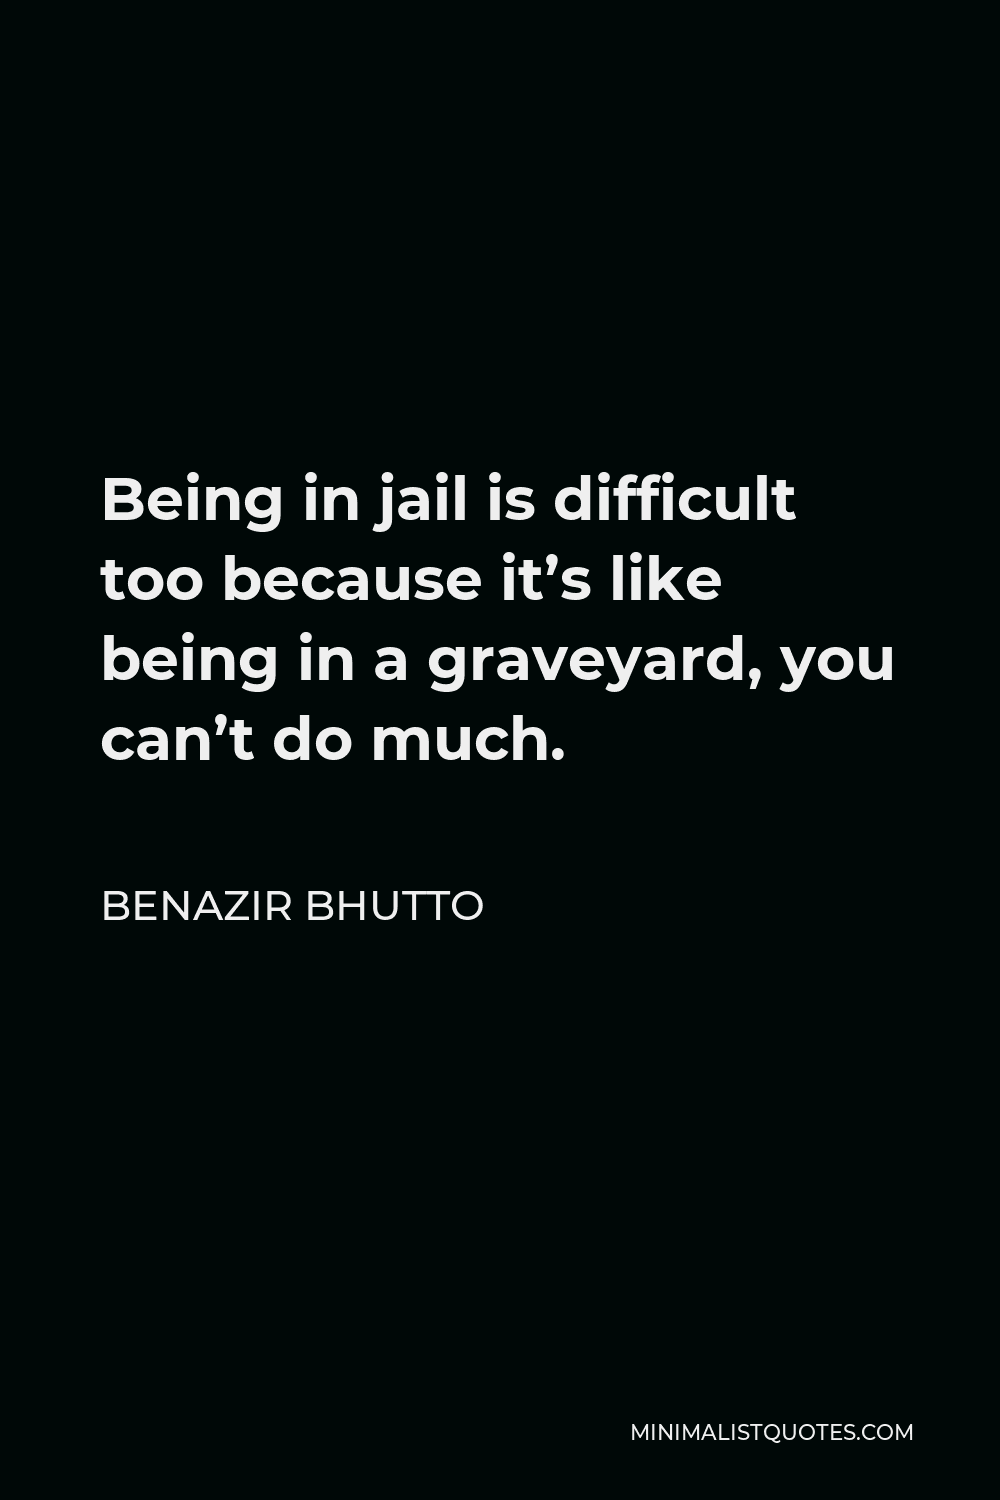 Benazir Bhutto Quote - Being in jail is difficult too because it’s like being in a graveyard, you can’t do much.